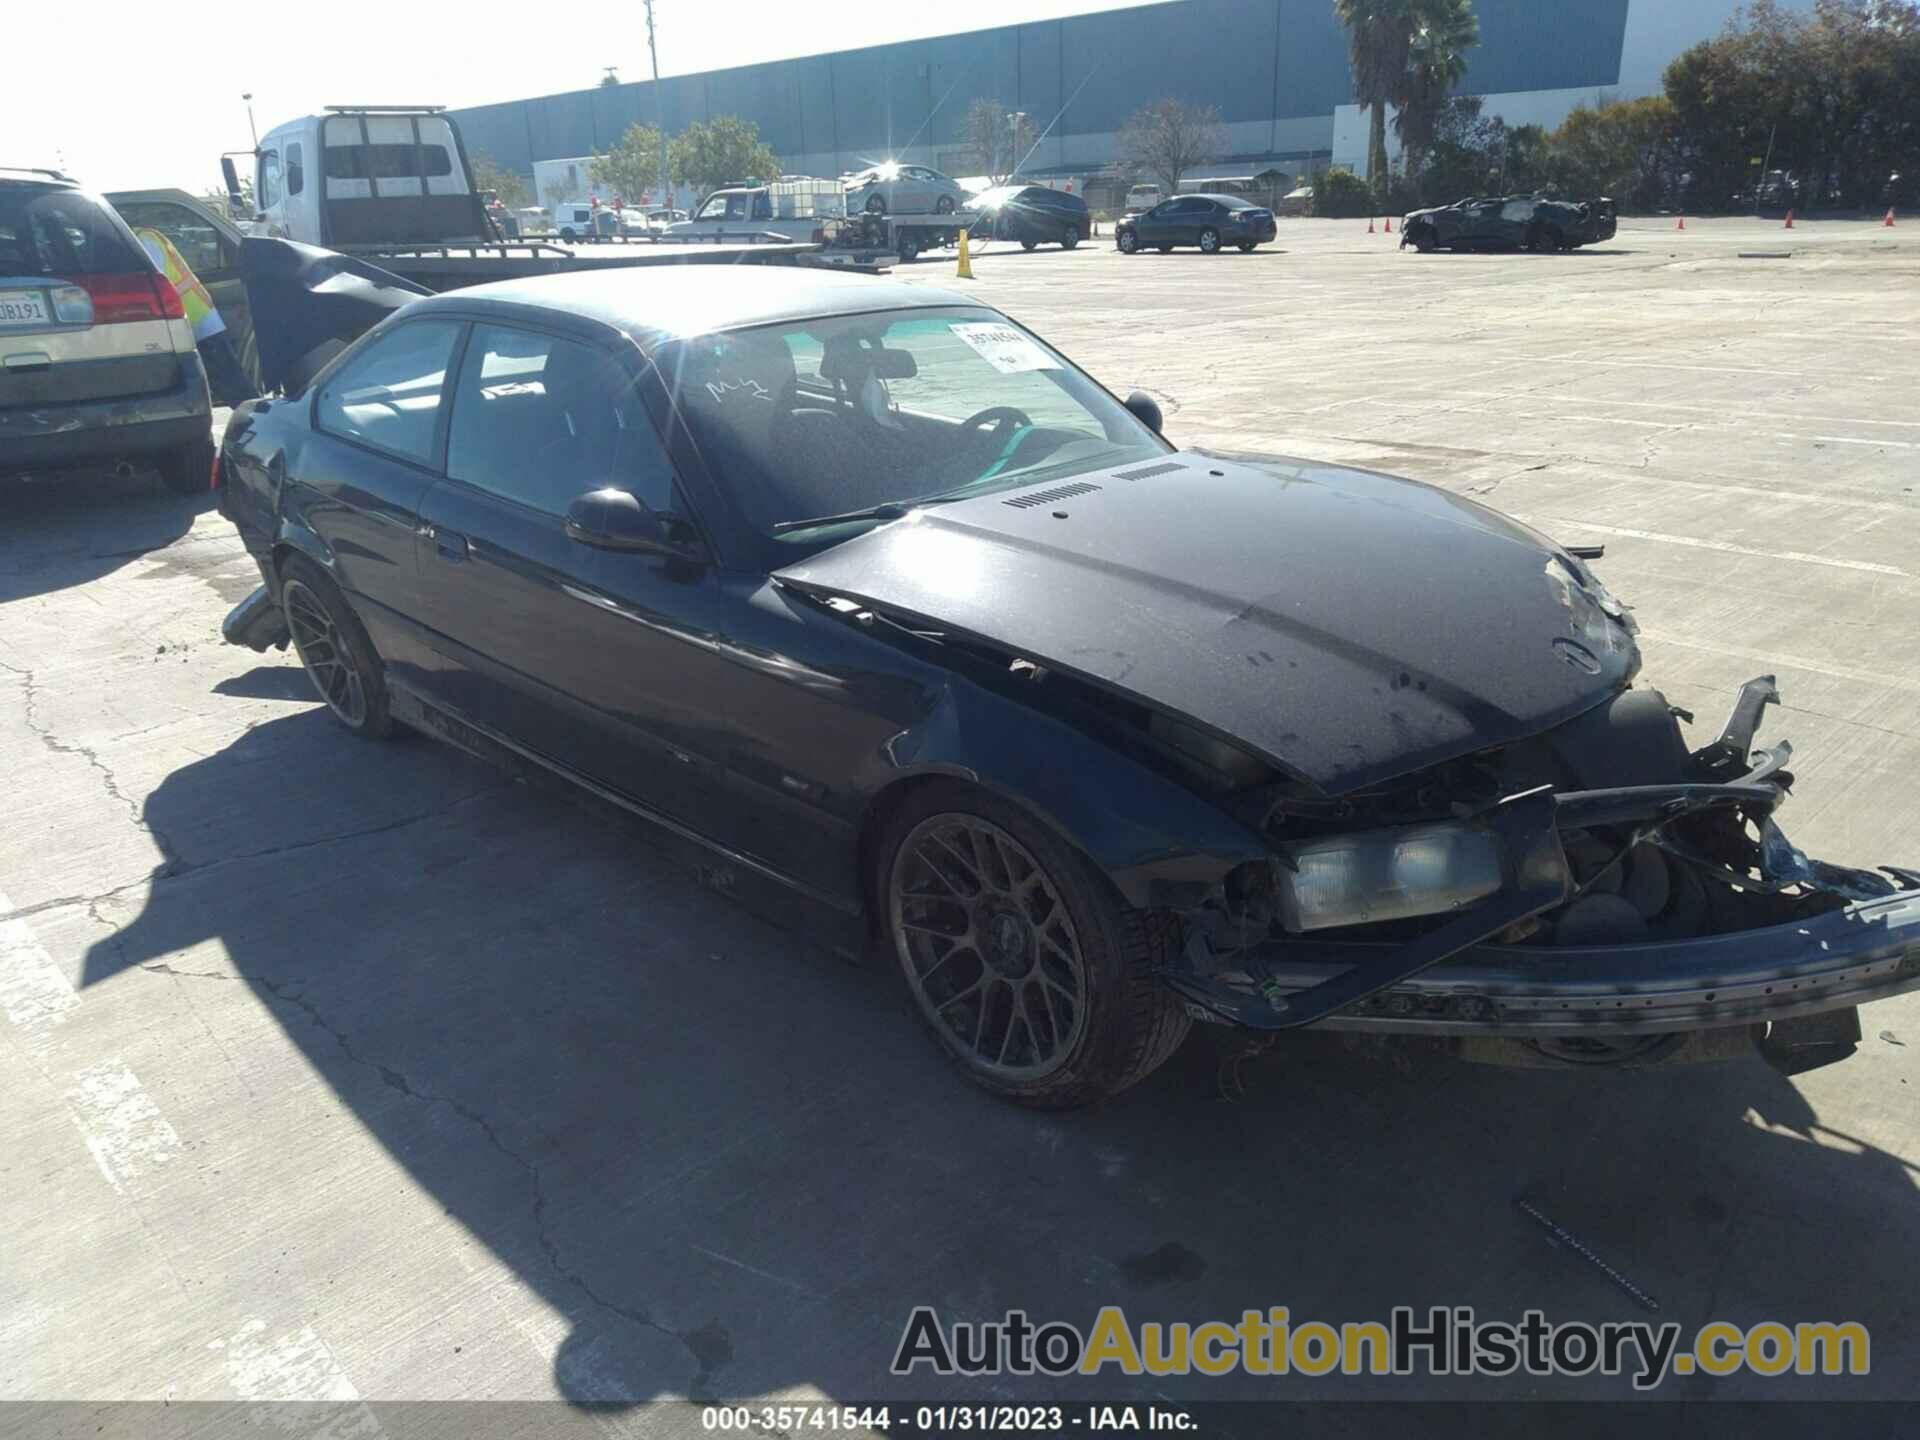 BMW M3, WBSBF9327SEH00317